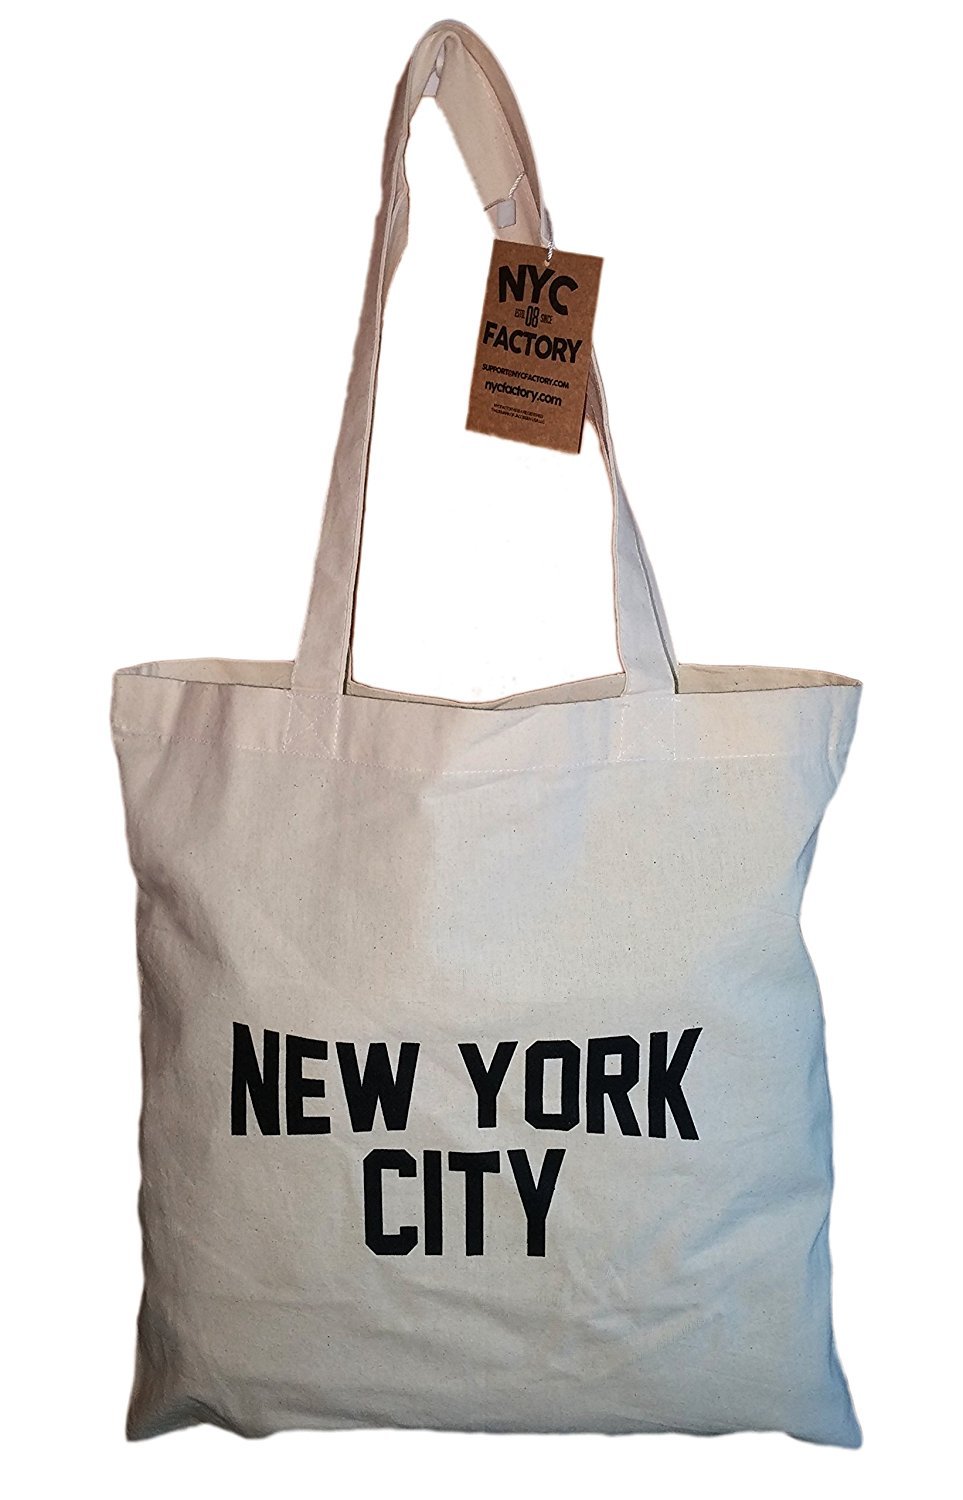 JC PENNEY fabric tote bag NYC store